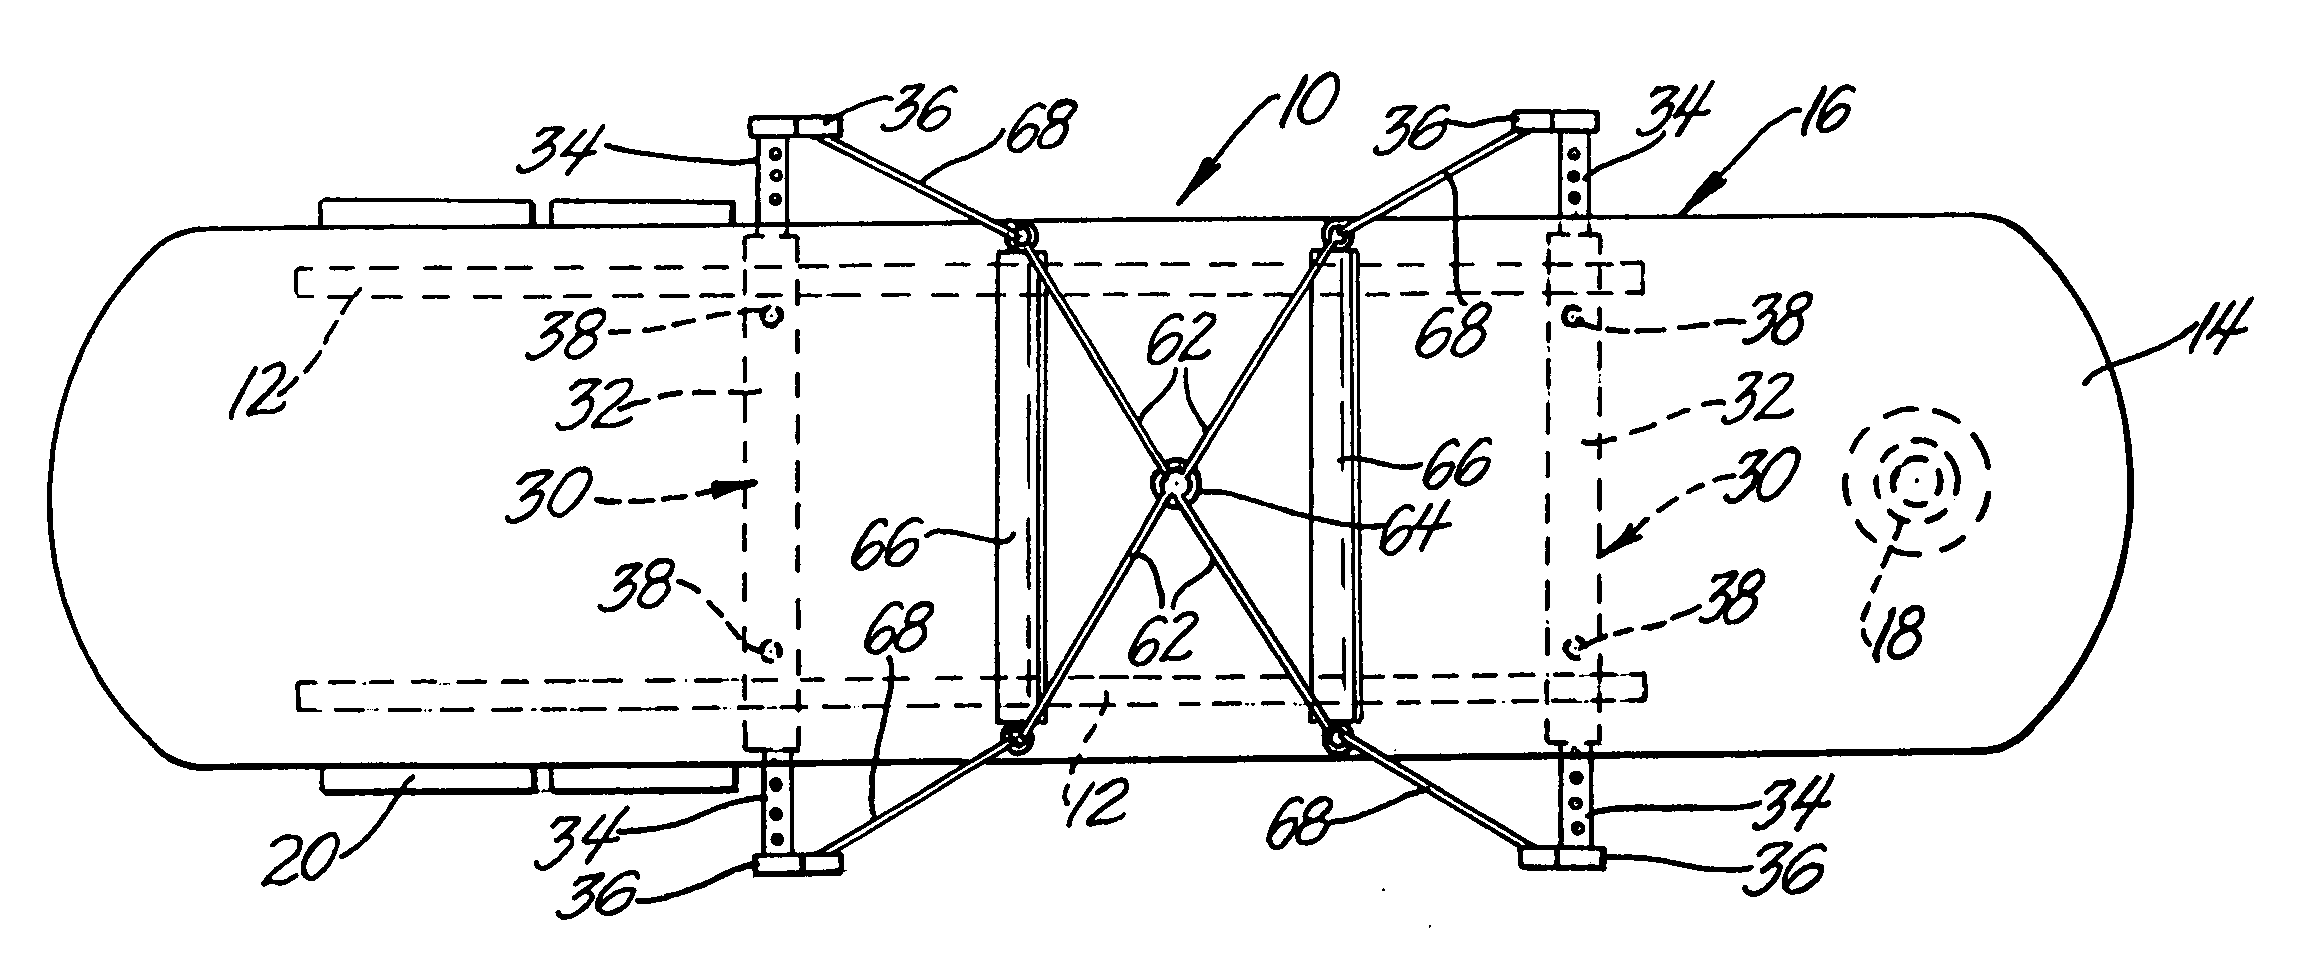 Outrigger lifting device for fuel tankers